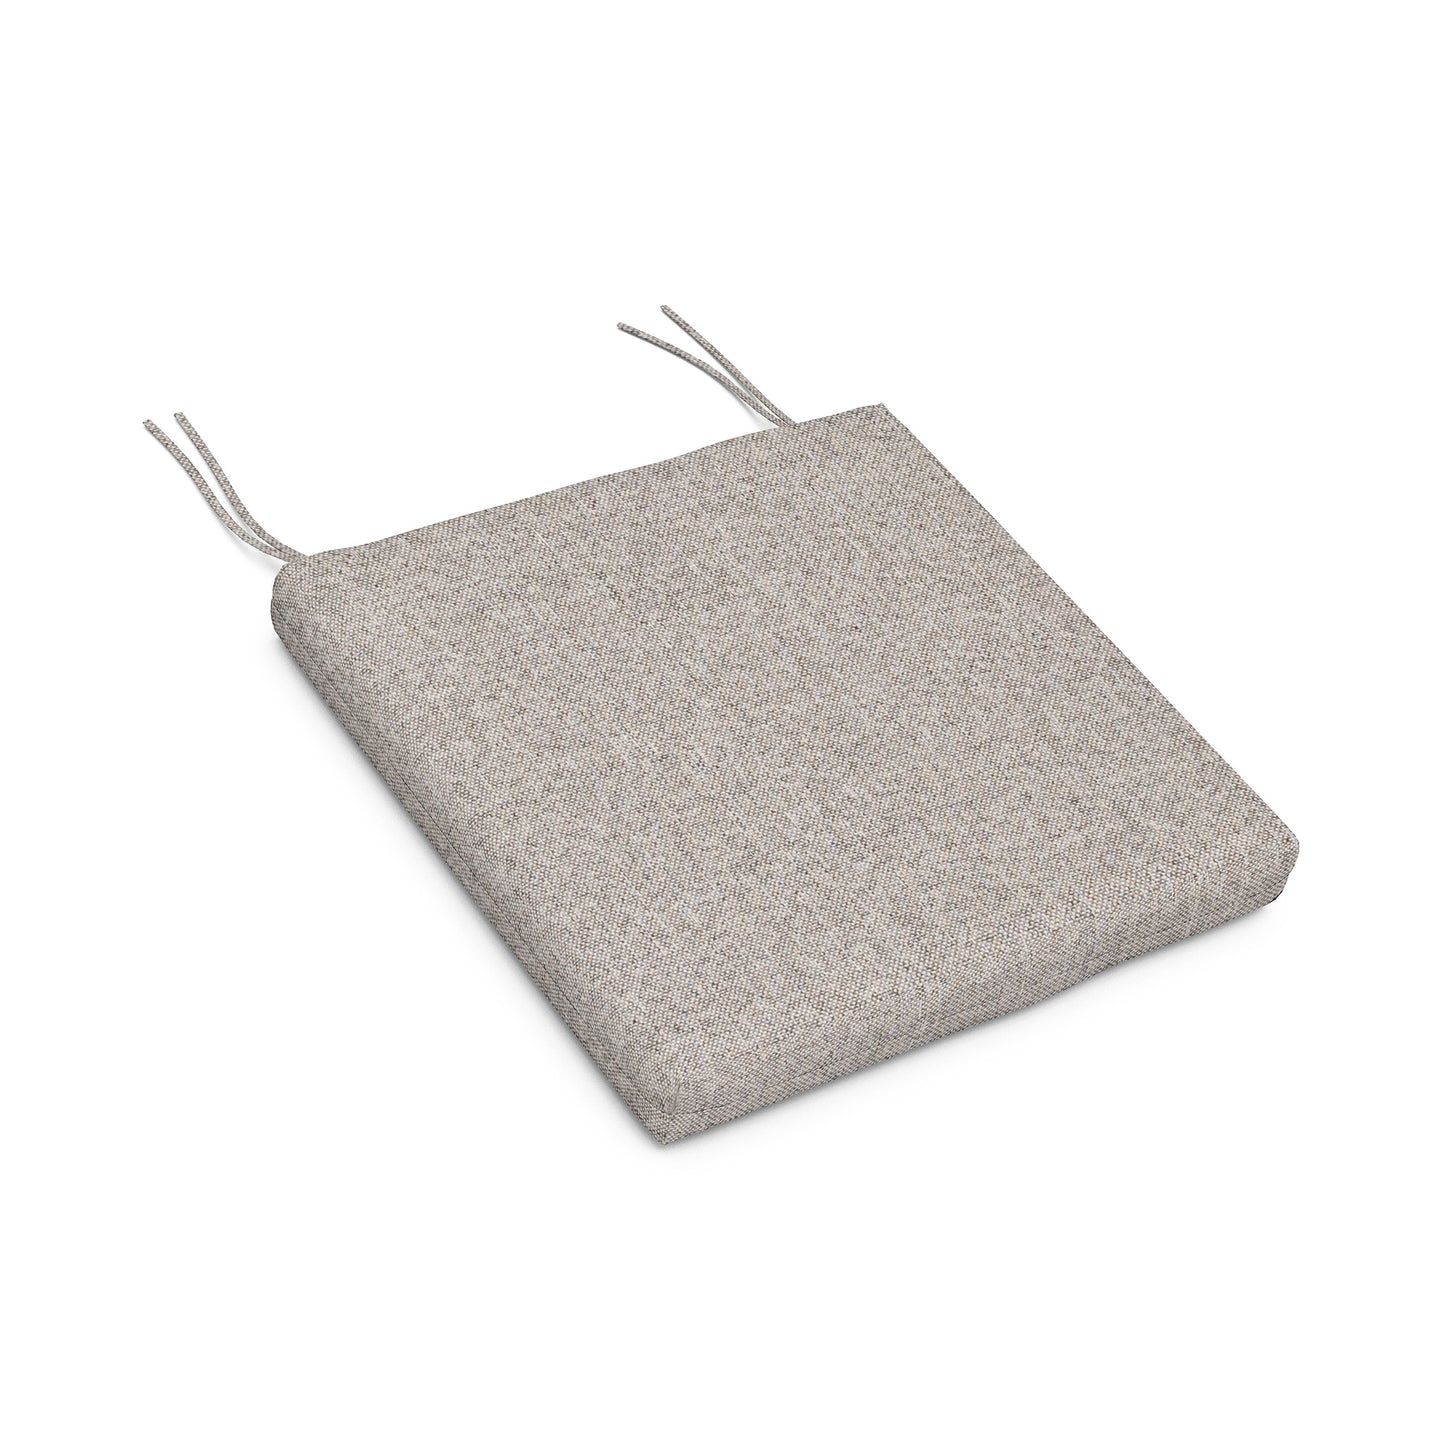 A square, light grey POLYWOOD® XPWS0001 fabric seat cushion with two protruding ties at one corner, isolated on a white background.